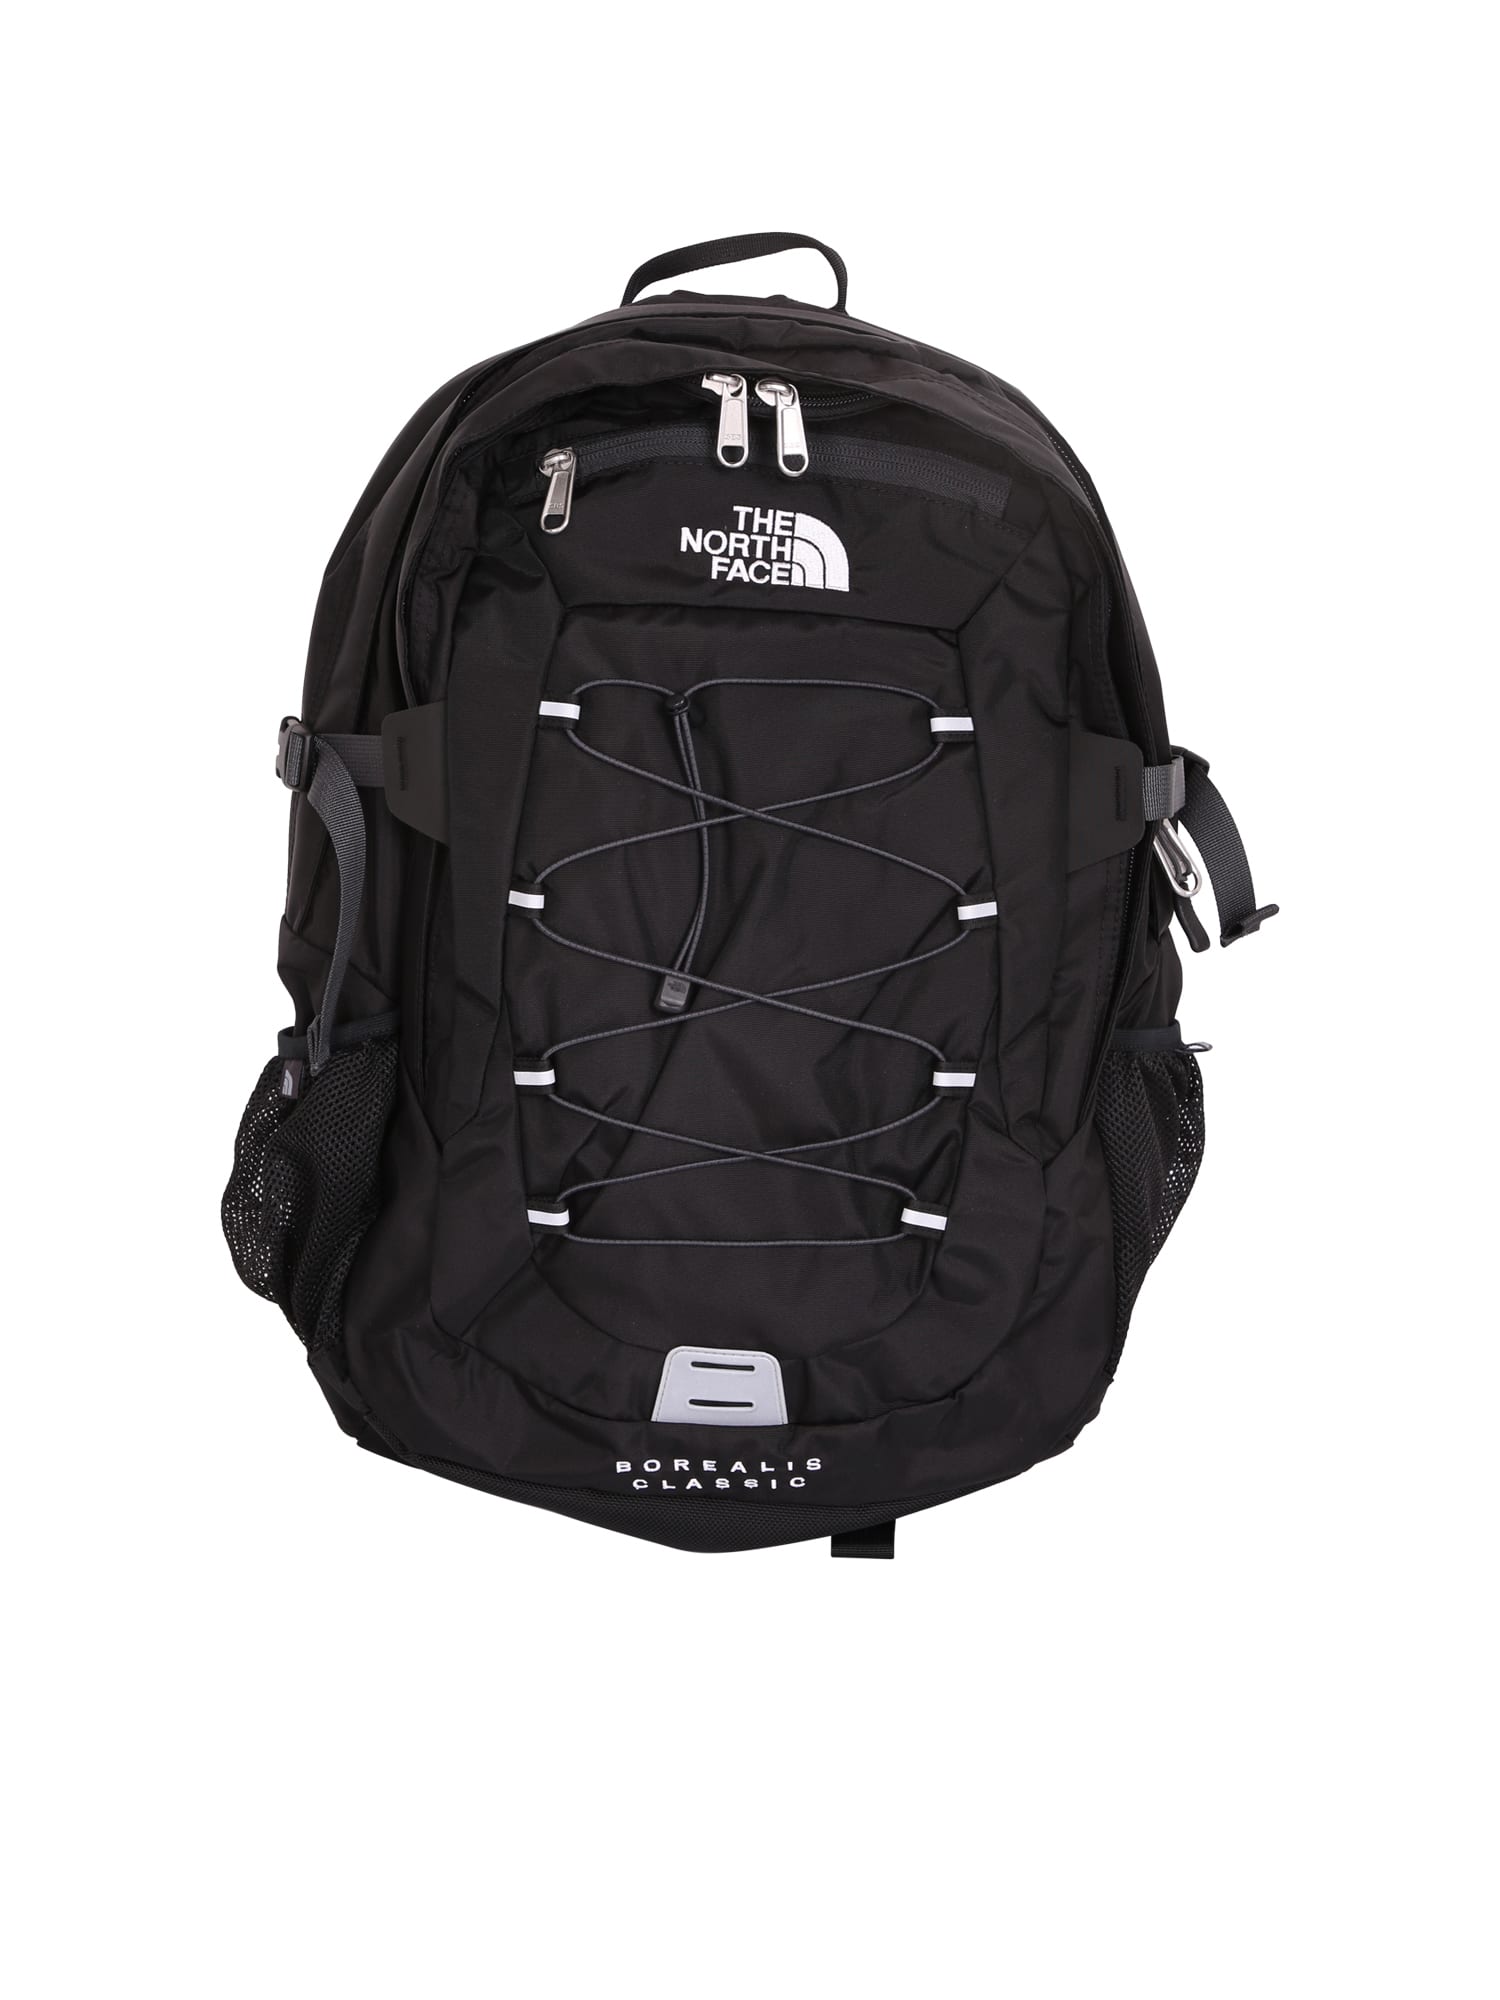 The North Face Borealis Shell Backpack